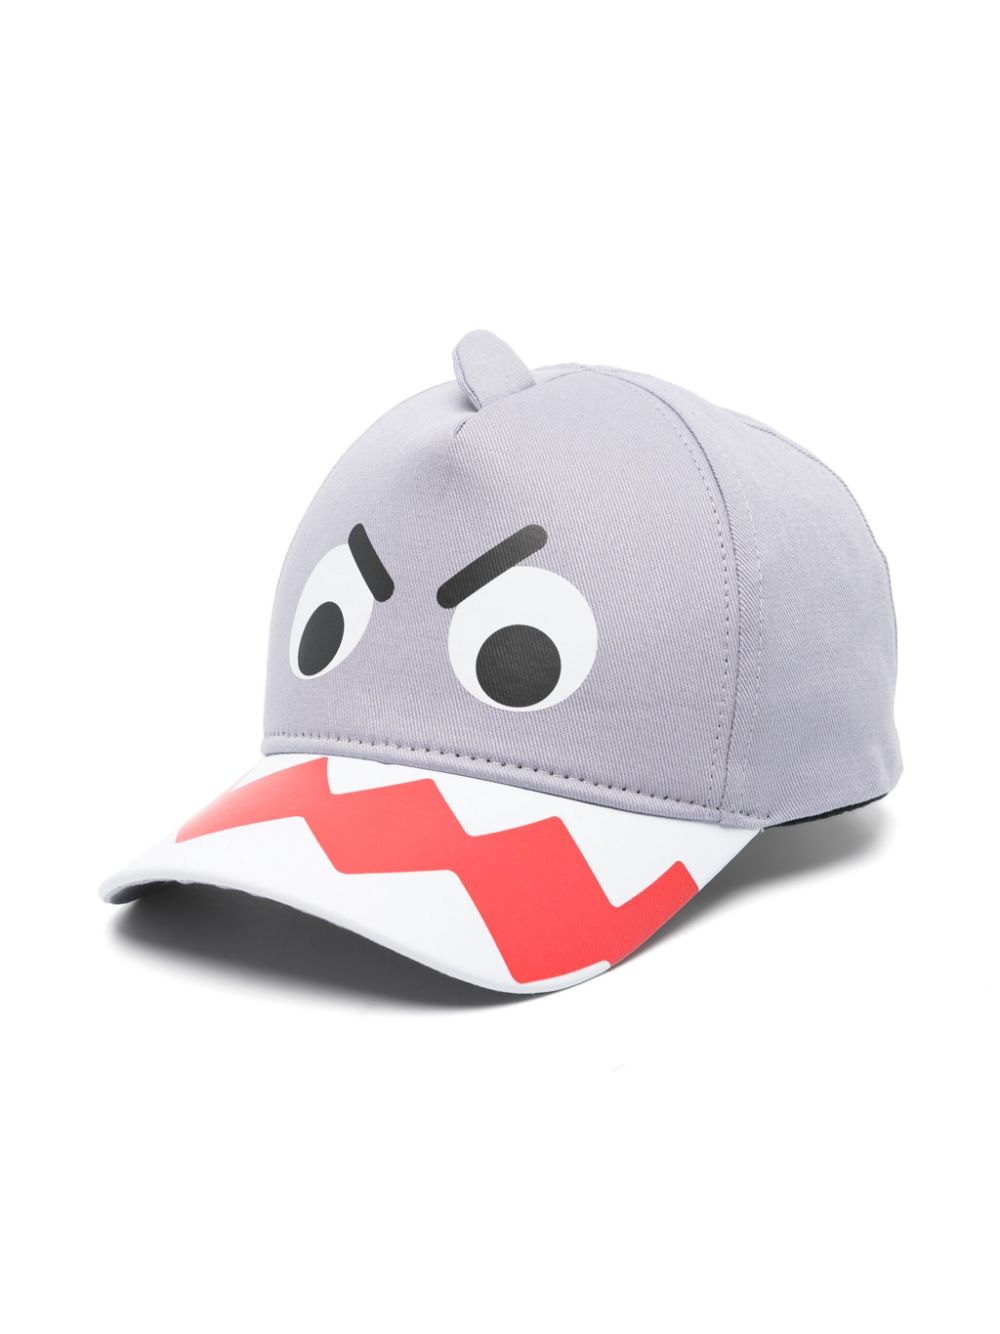 Gray hat for children with shark print